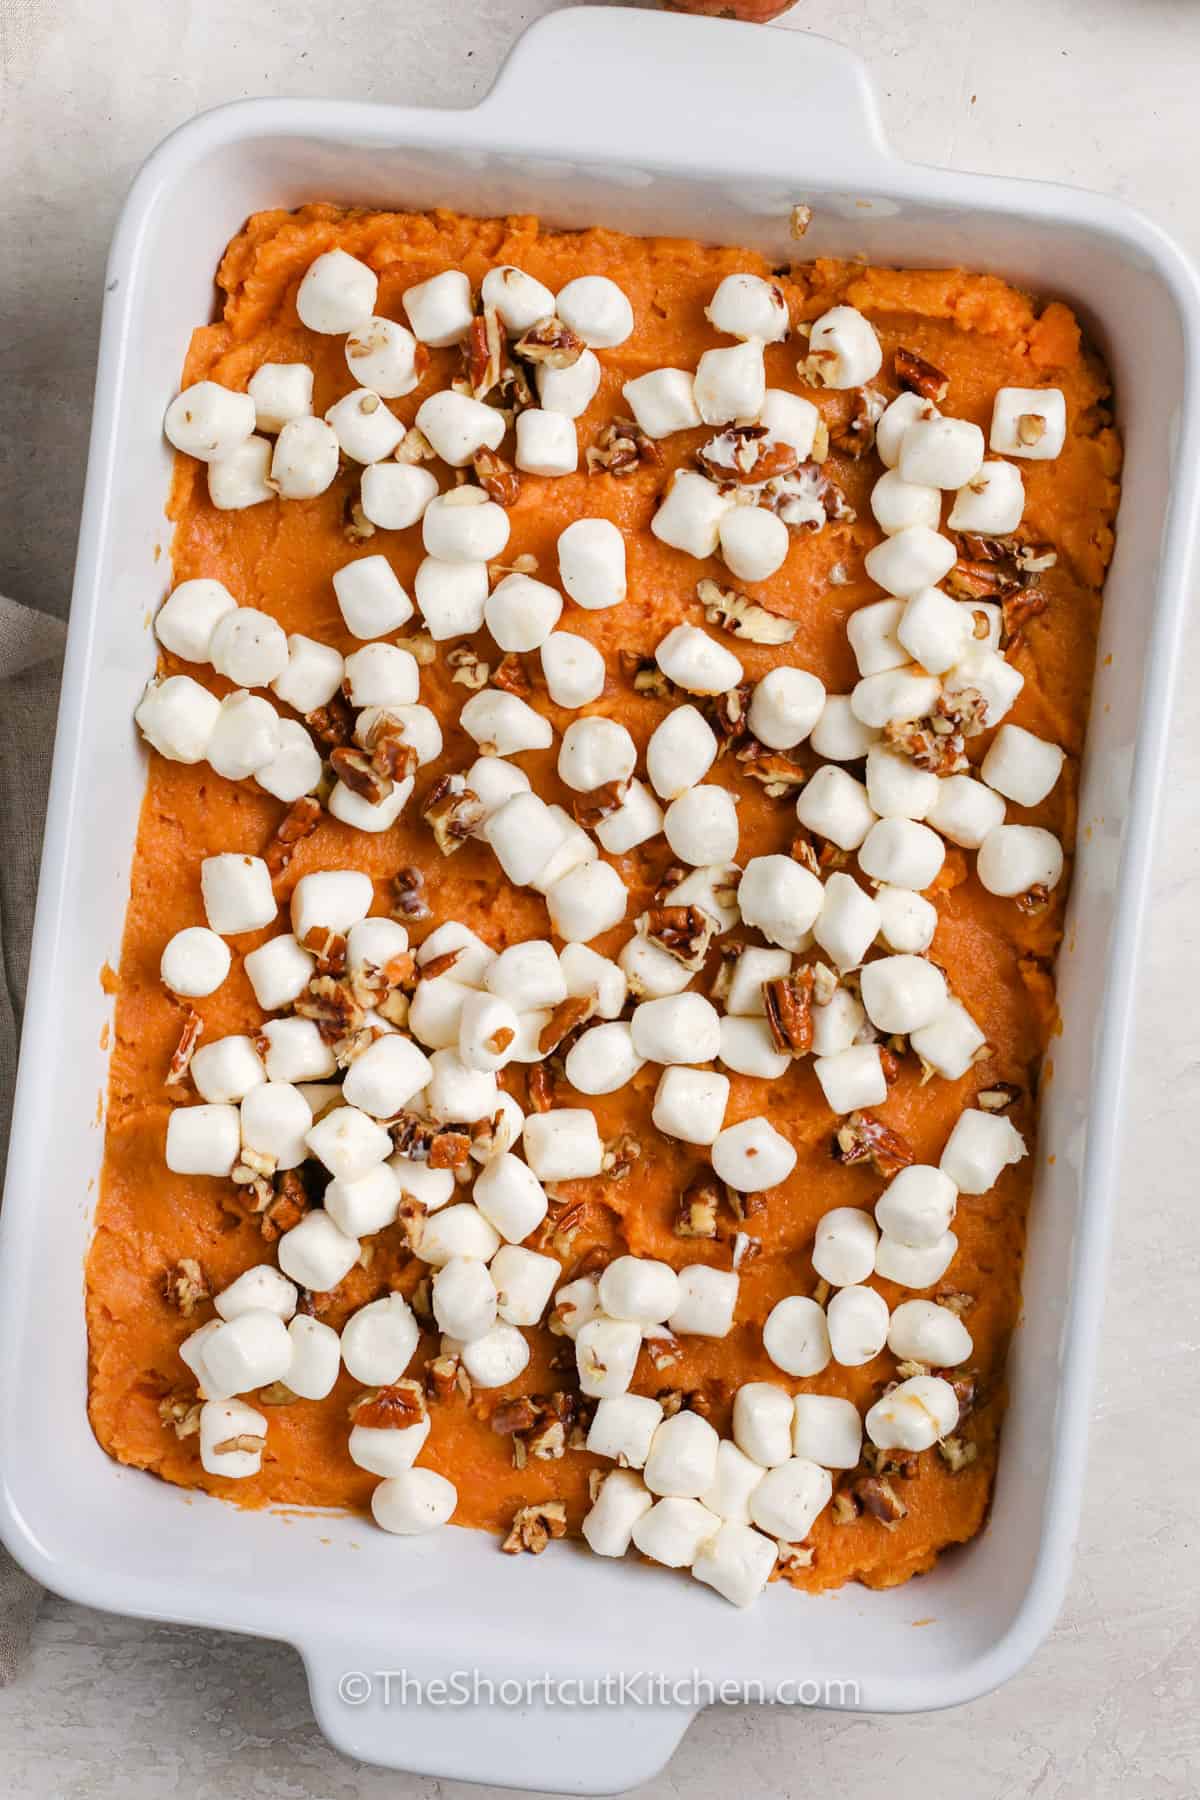 Canned Sweet Potato Casserole before cooking